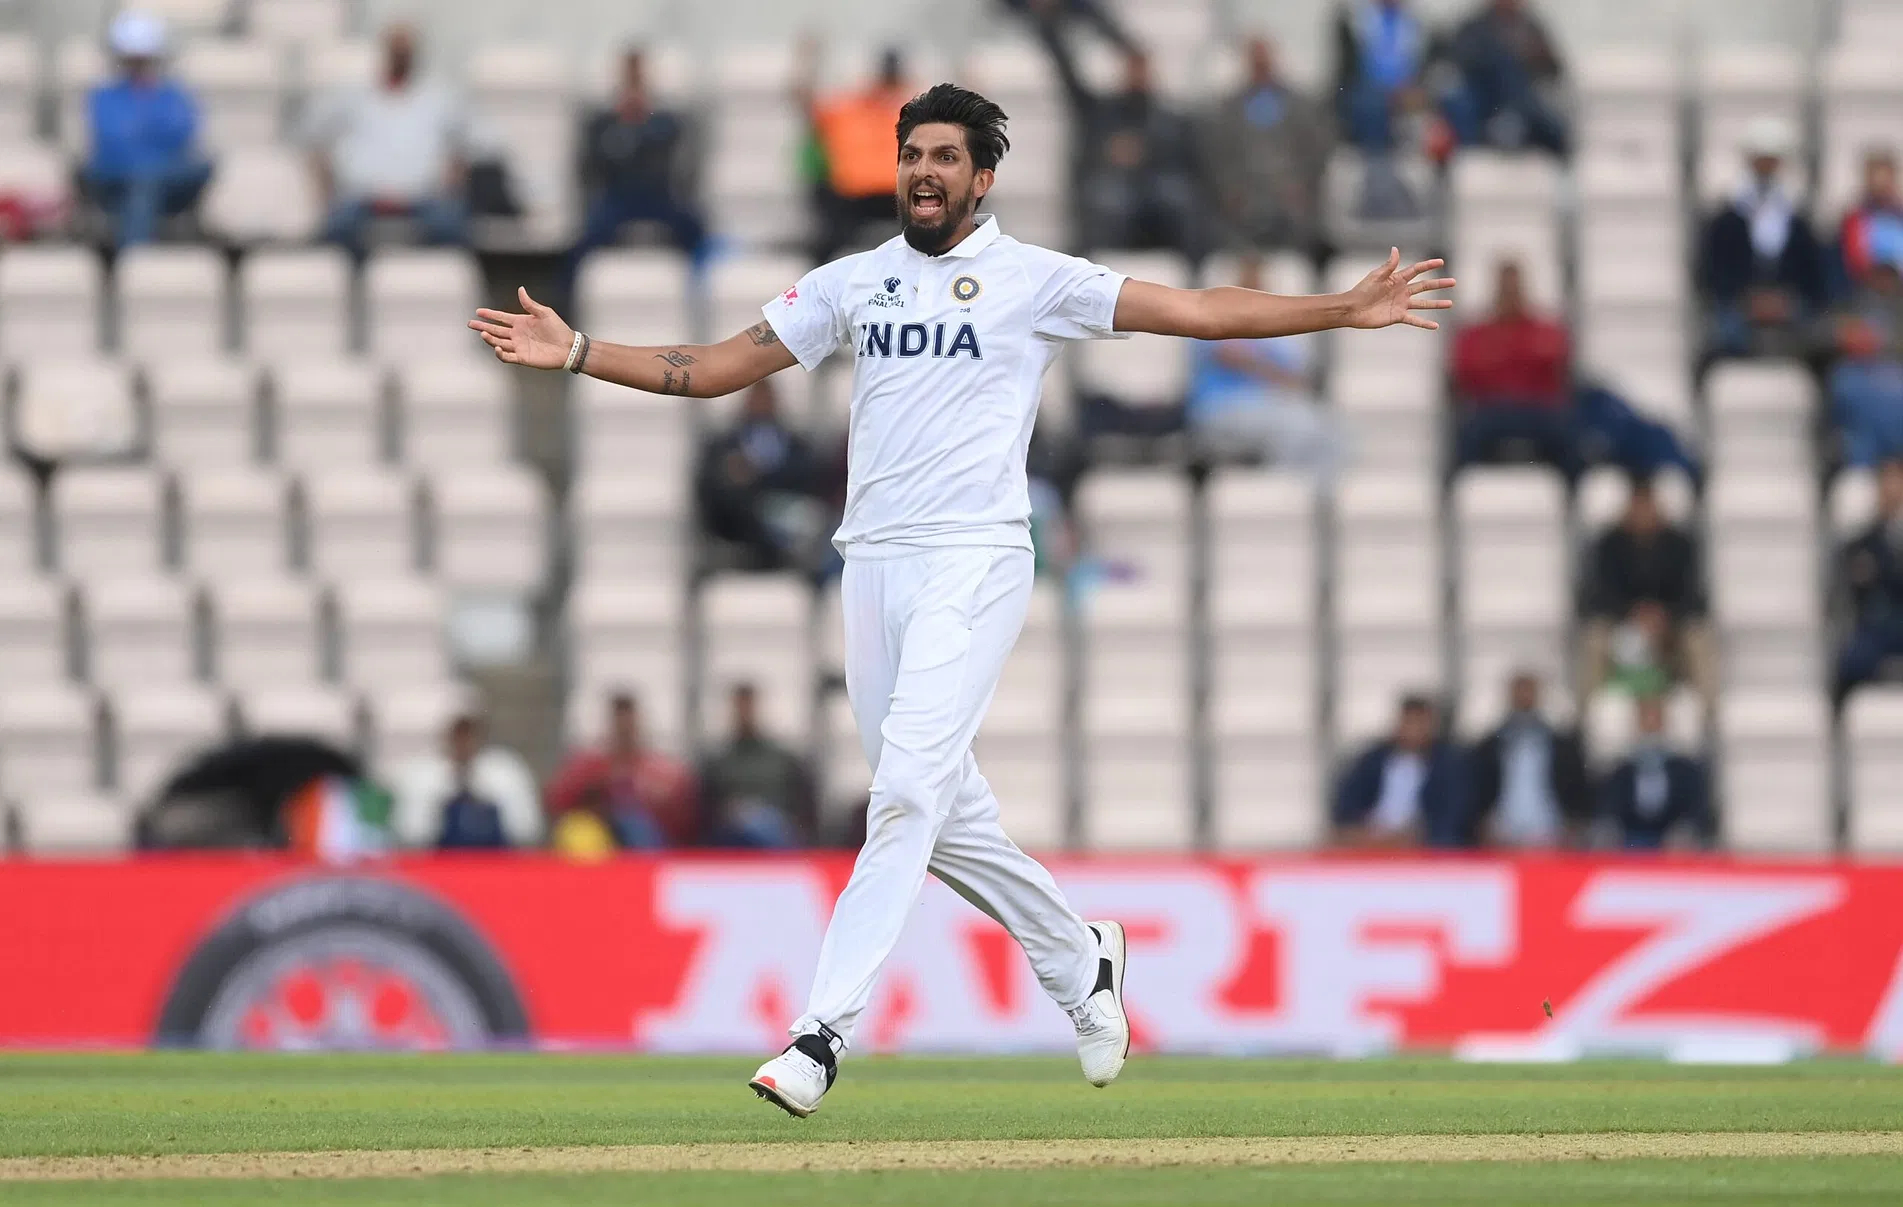 Ishant Sharma picked 3 wickets in the WTC 2021 Final | Getty